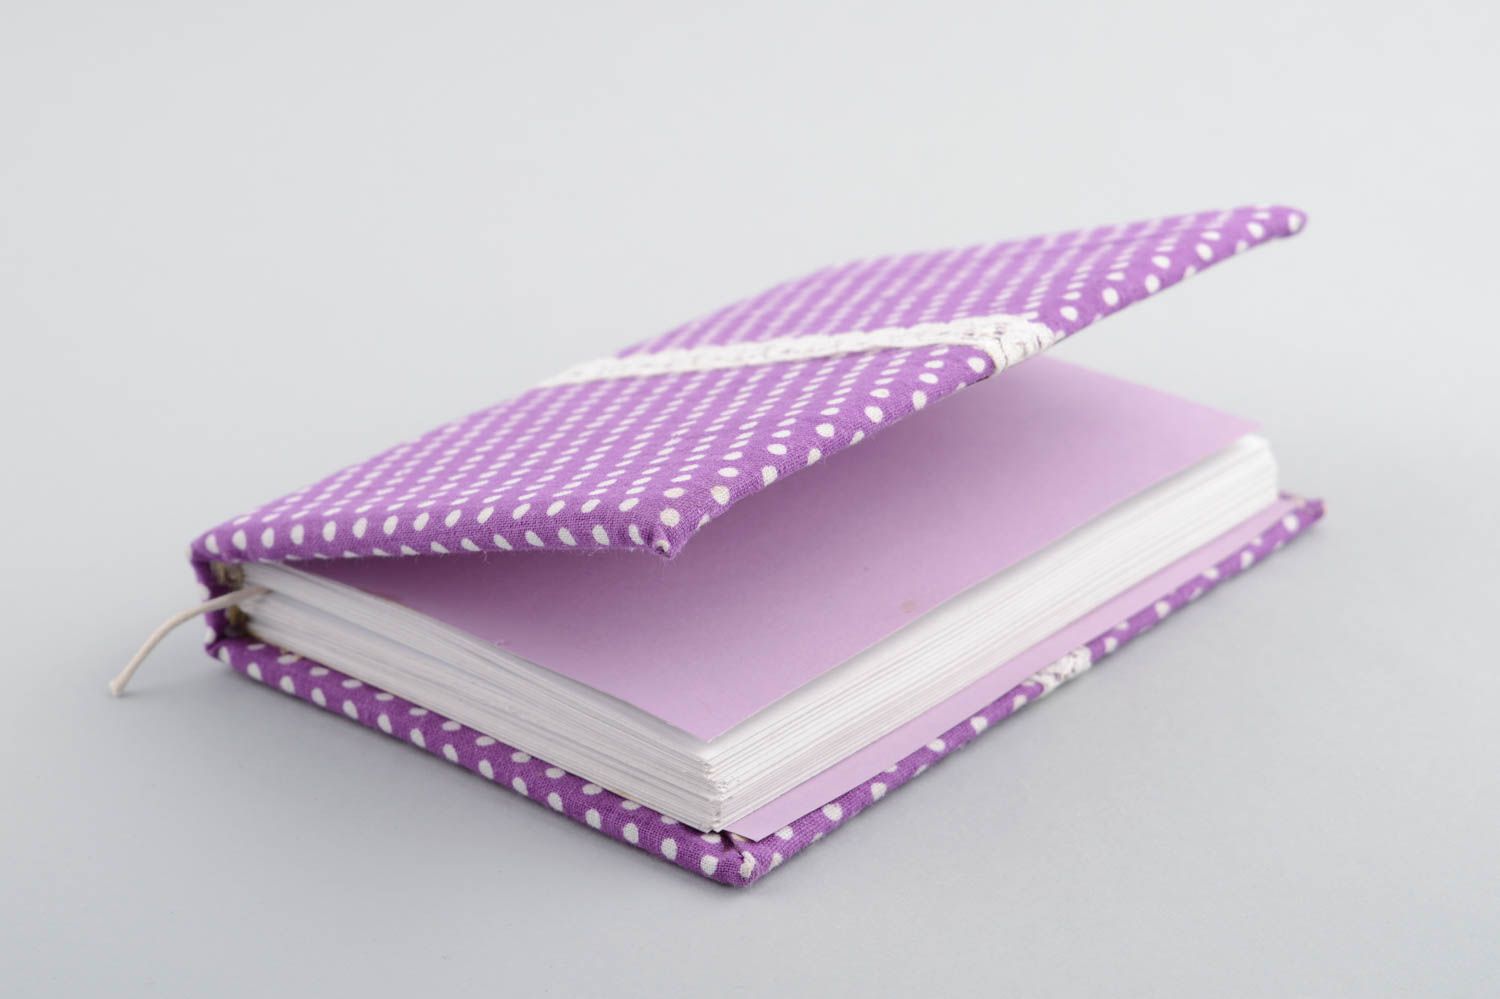 Handmade designer notebook with bright violet polka dot fabric cover with lace photo 3